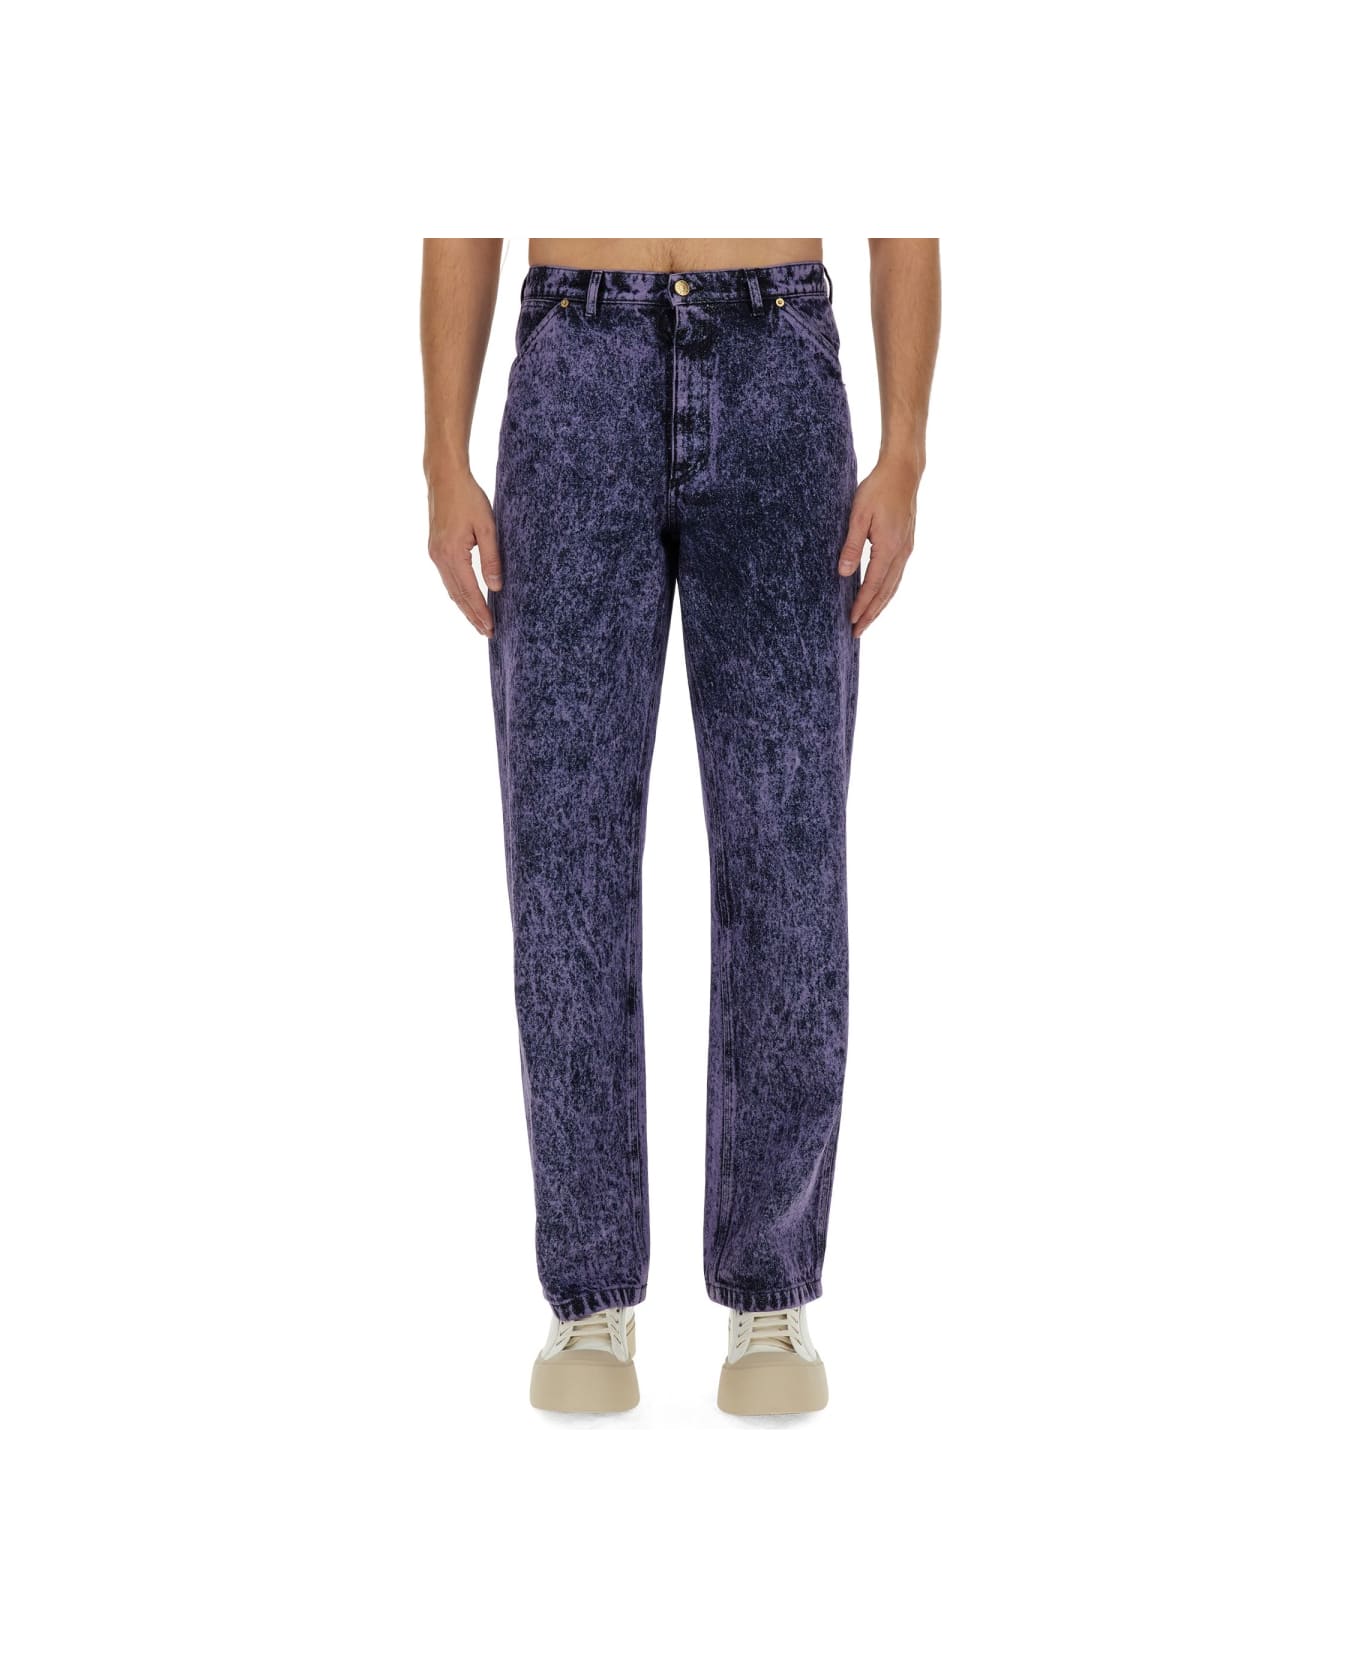 Marni Marbled Effect Jeans - BLUE